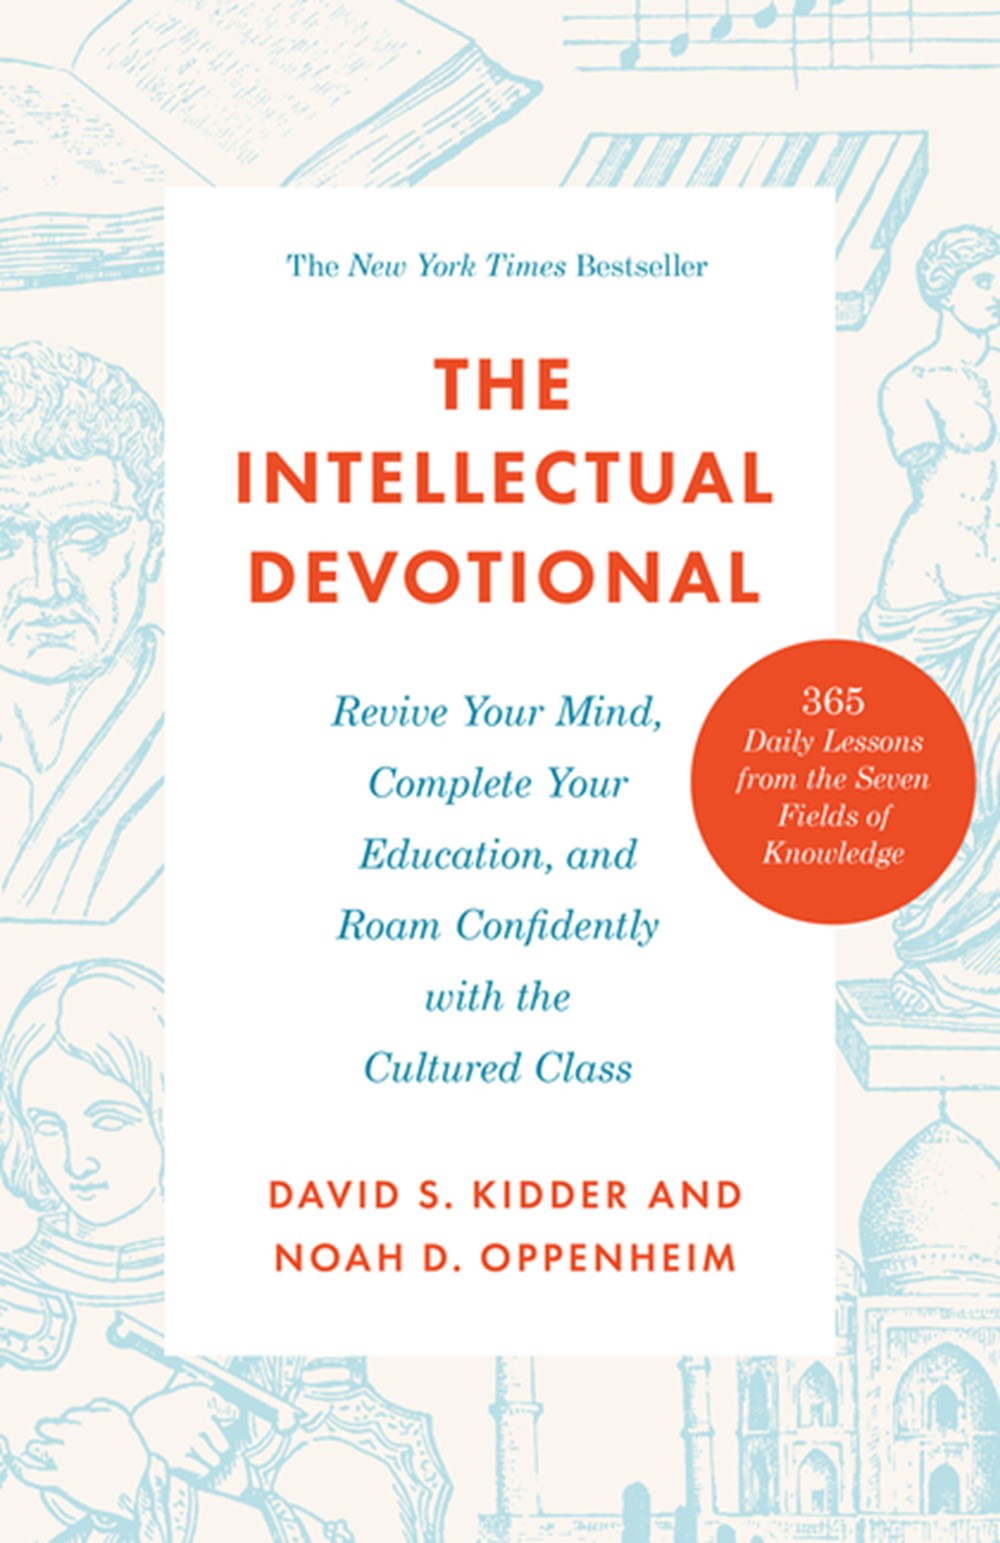 Intellectual Devotional Revive Your Mind, Complete Your Education, and Roam Confidently with the Cul